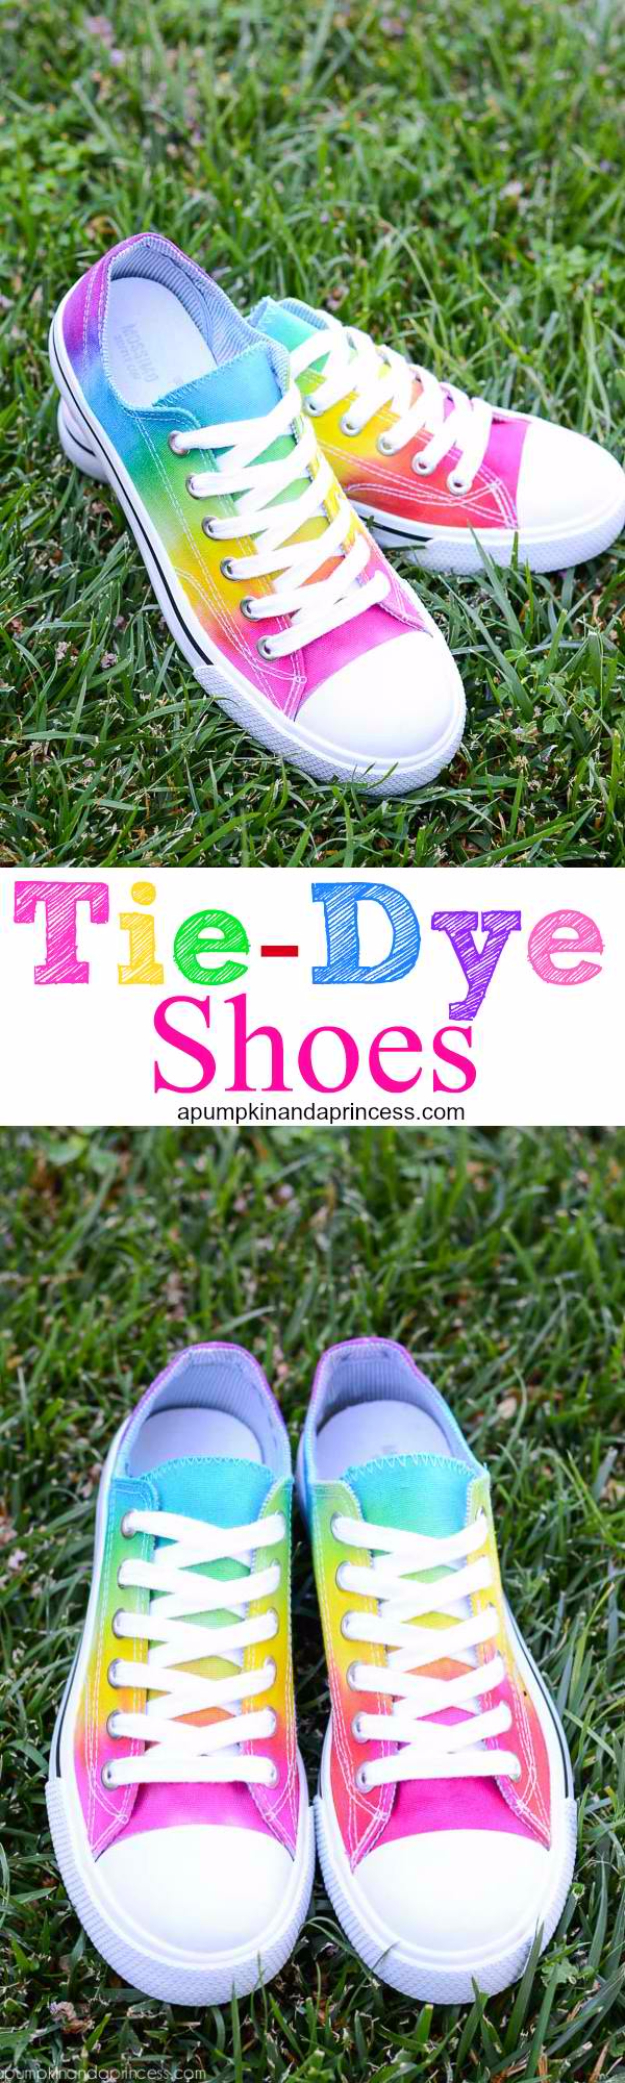 DIY Shoe Makeovers - Rainbow Tie Dye Shoes - Cool Ways to Update, Decorate, Paint, Bedazle and Add Sparkle to Your Flats, Pumps, Tennis Shoes, Boots and Boring Shoes - Cool Crafts and DIY Shoe Ideas for Teens and Adults 